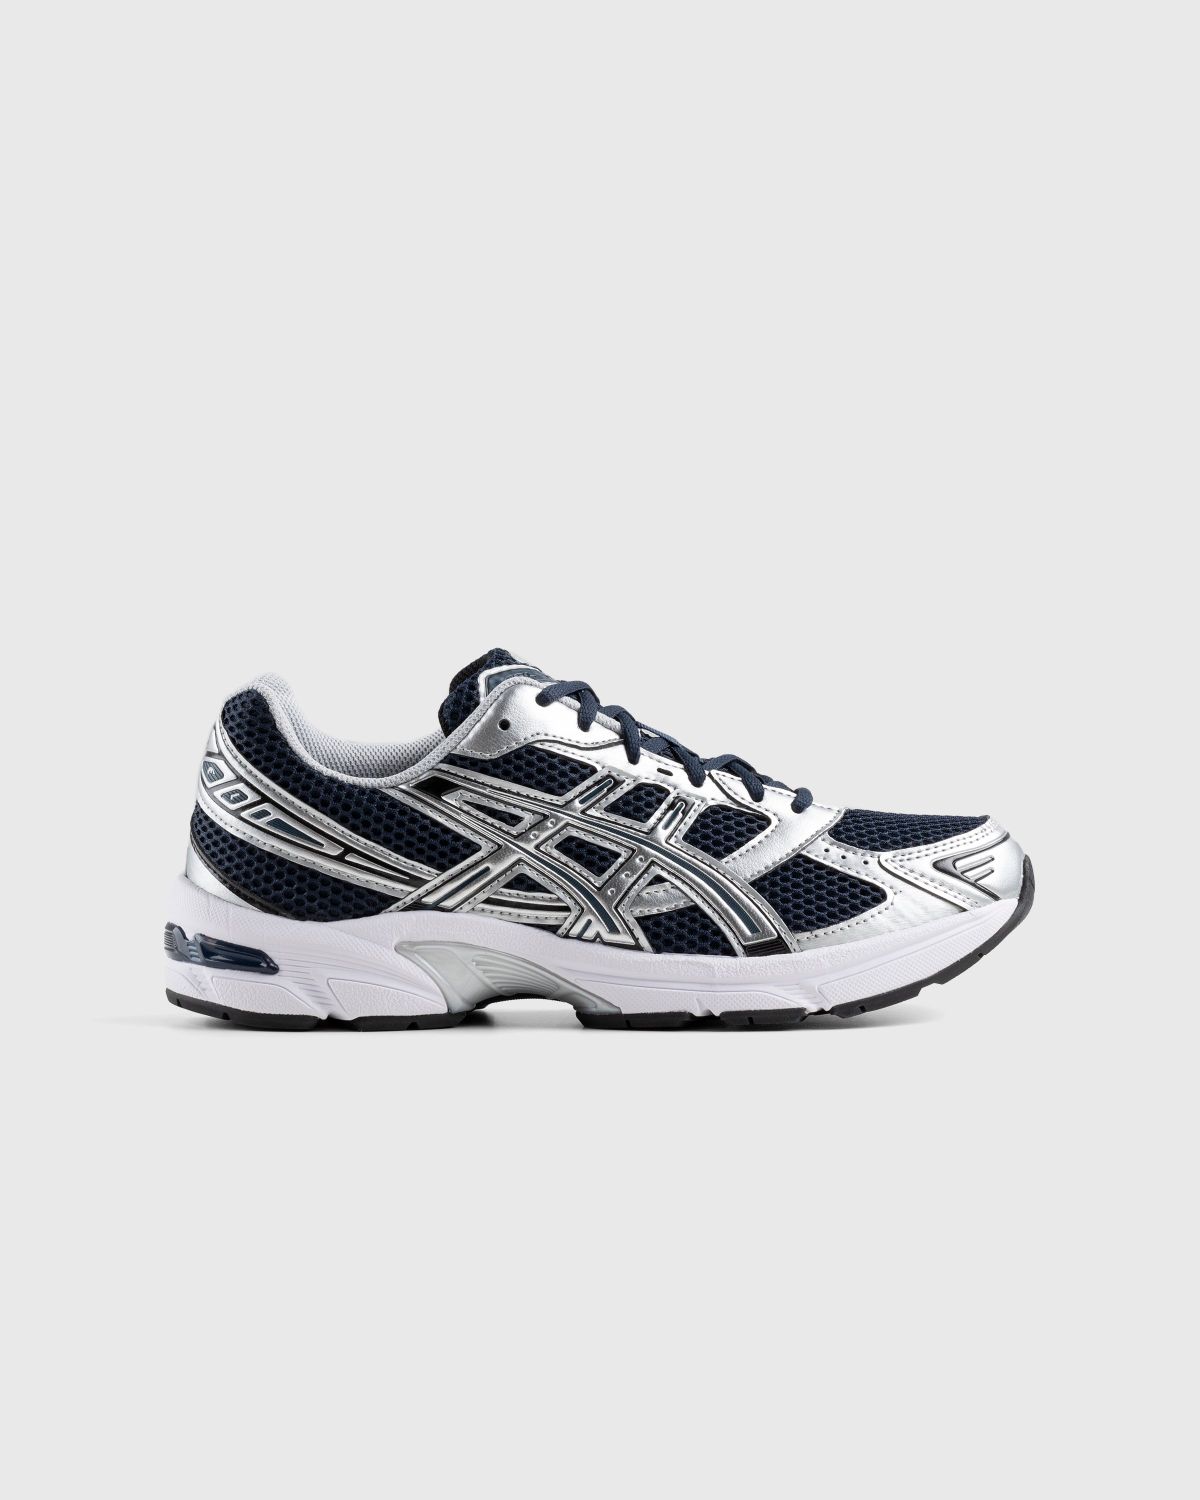 asics – GEL-1130 French Blue/Pure Silver - Sneakers - Blue - Image 1